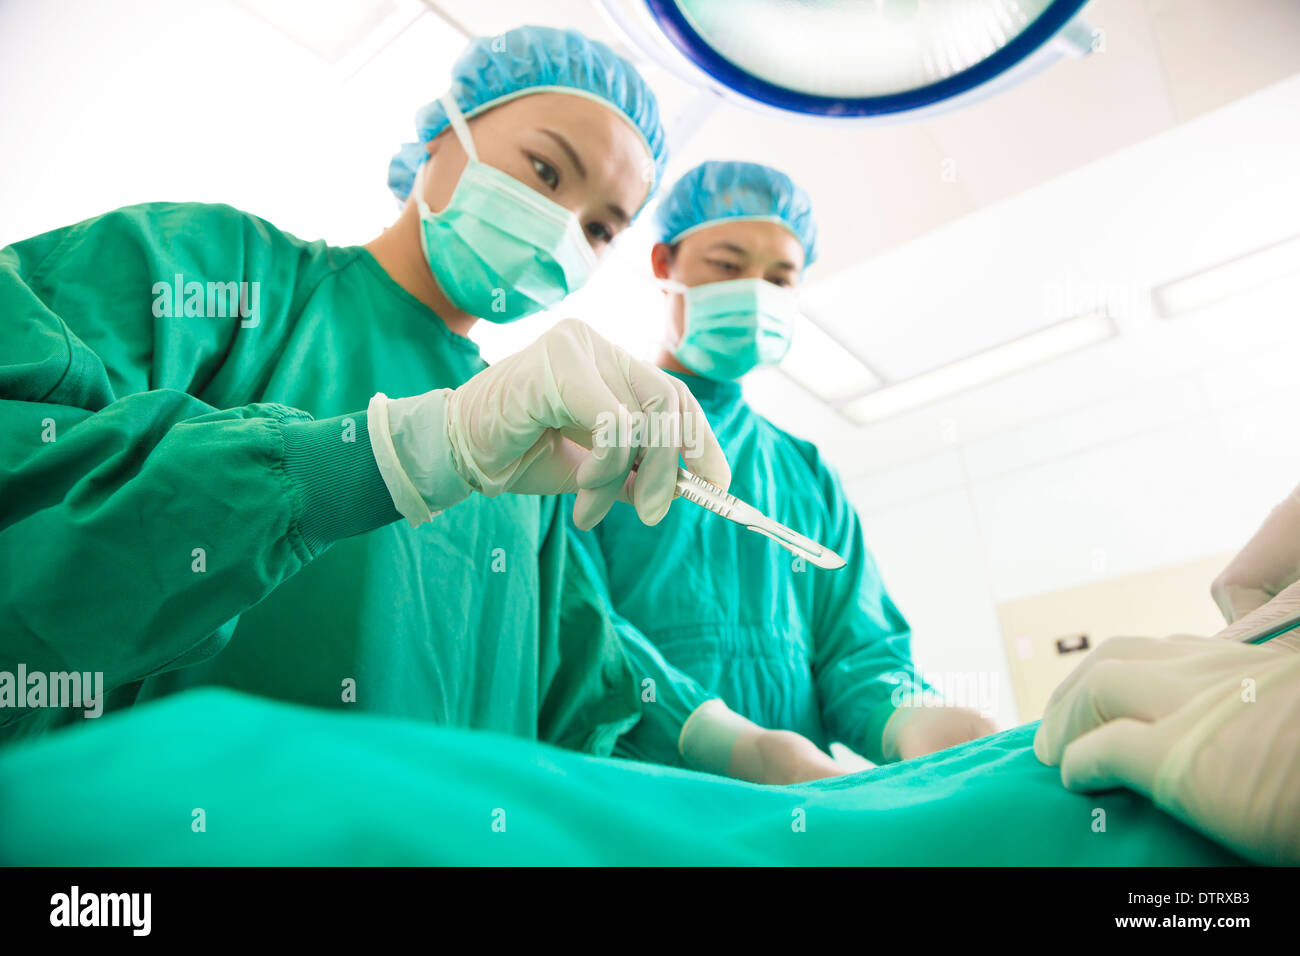 Professional aesthetic medicine surgeon operating  with scalpel at hospital Stock Photo